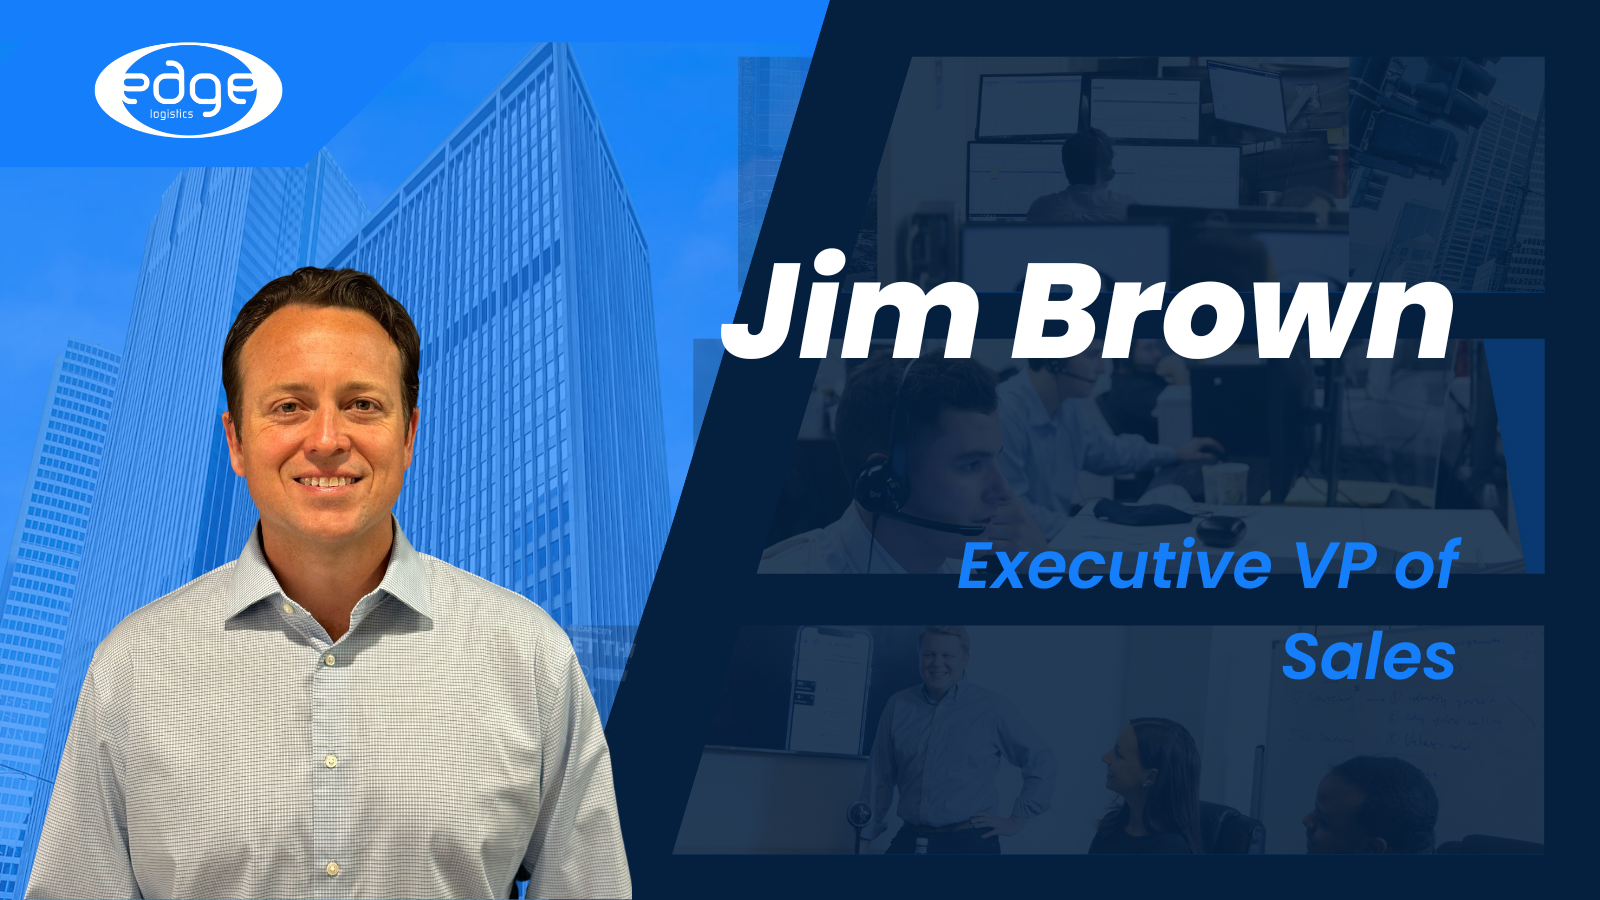 Edge Logistics Employee Spotlight: For Jim Brown, EVP of Sales, Success Starts with Building Relationships